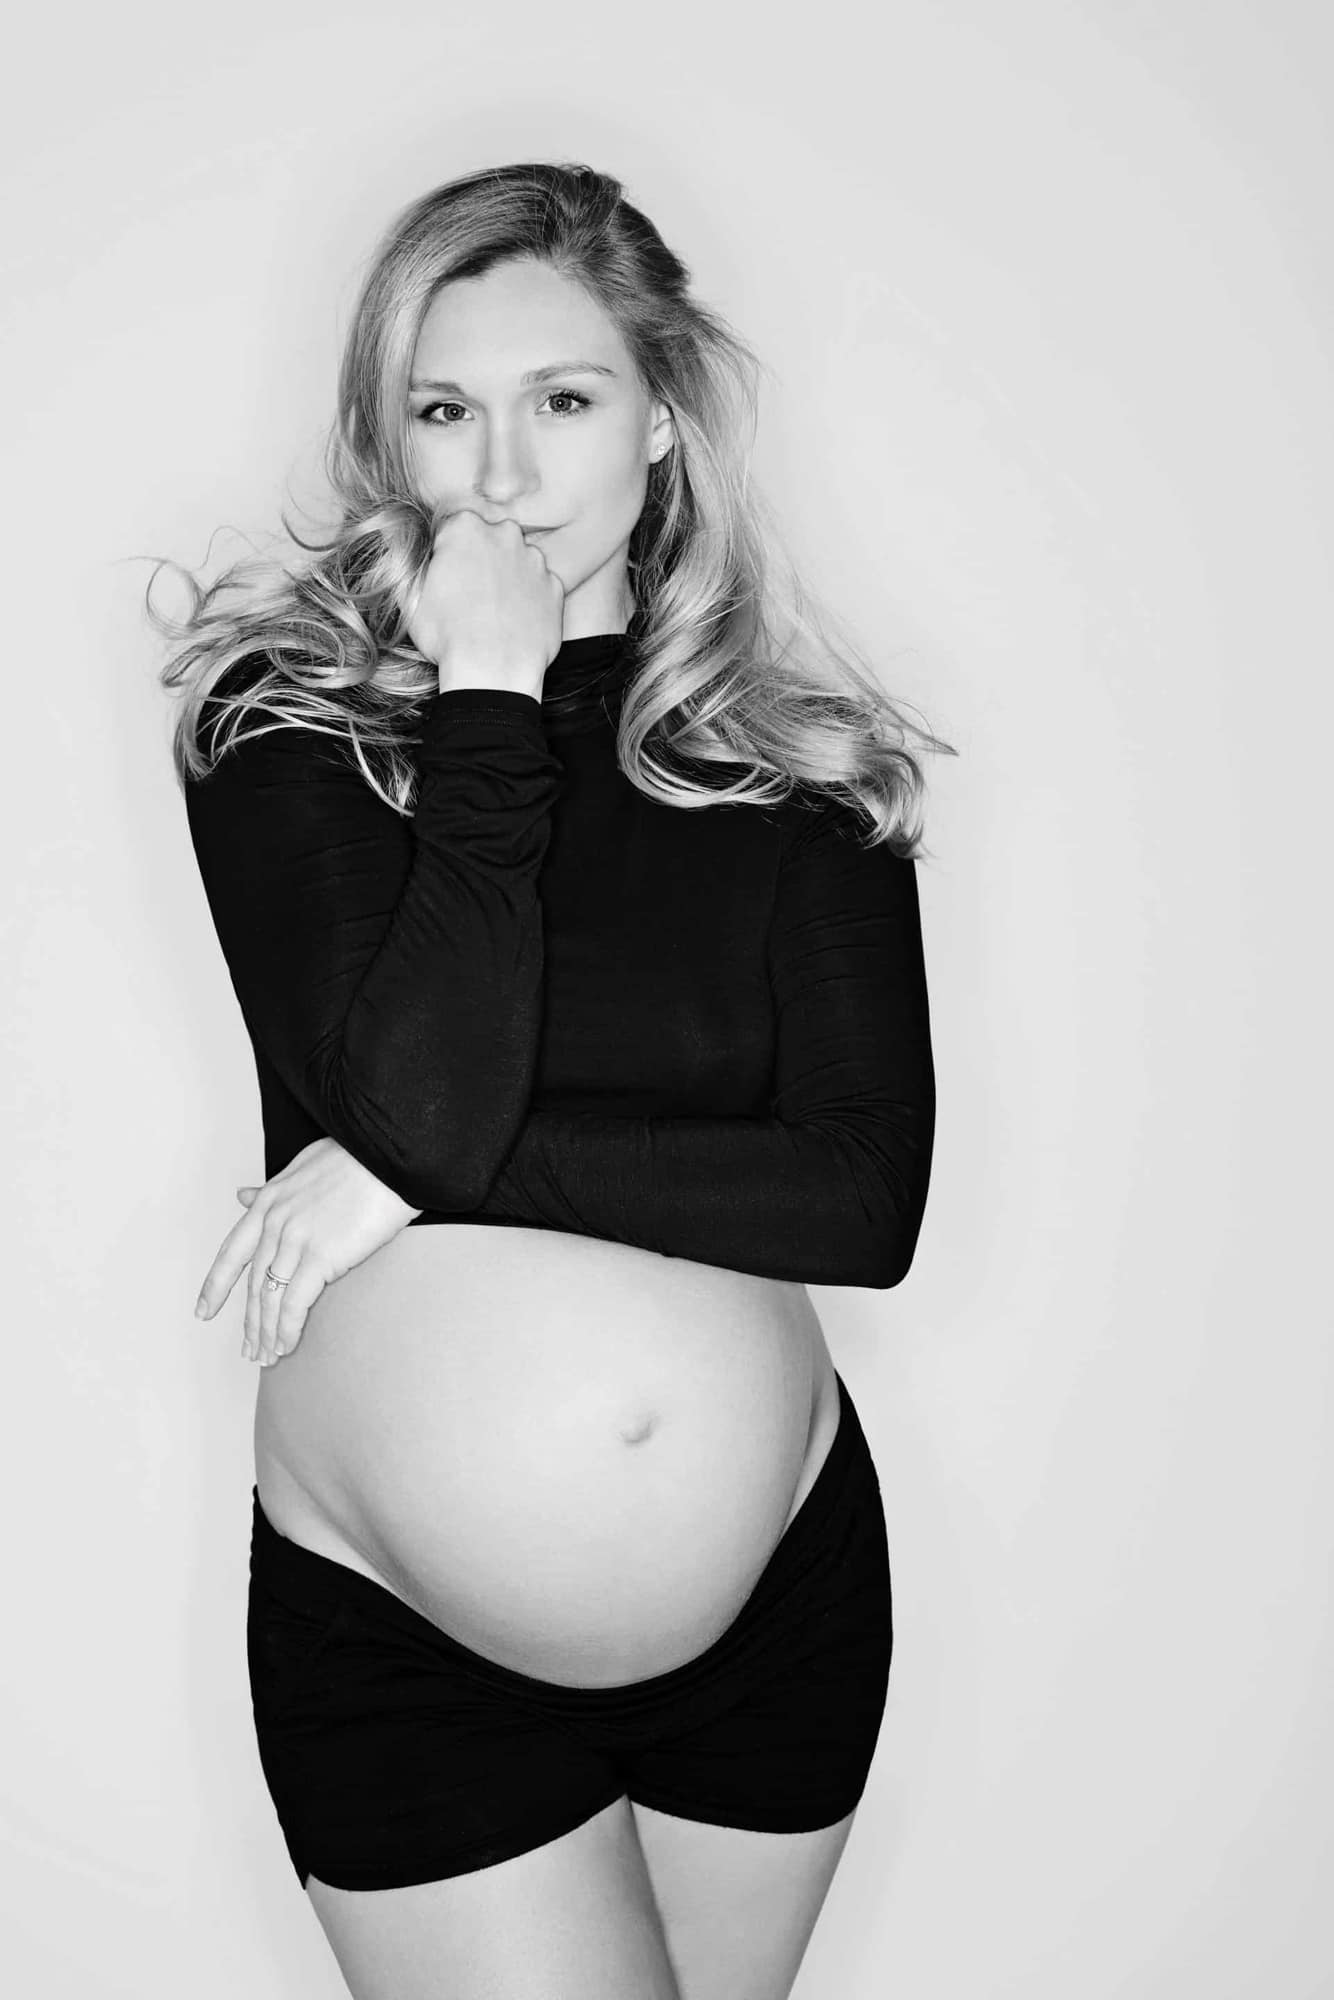 A black & white maternity photo of a woman in black top and bottoms.